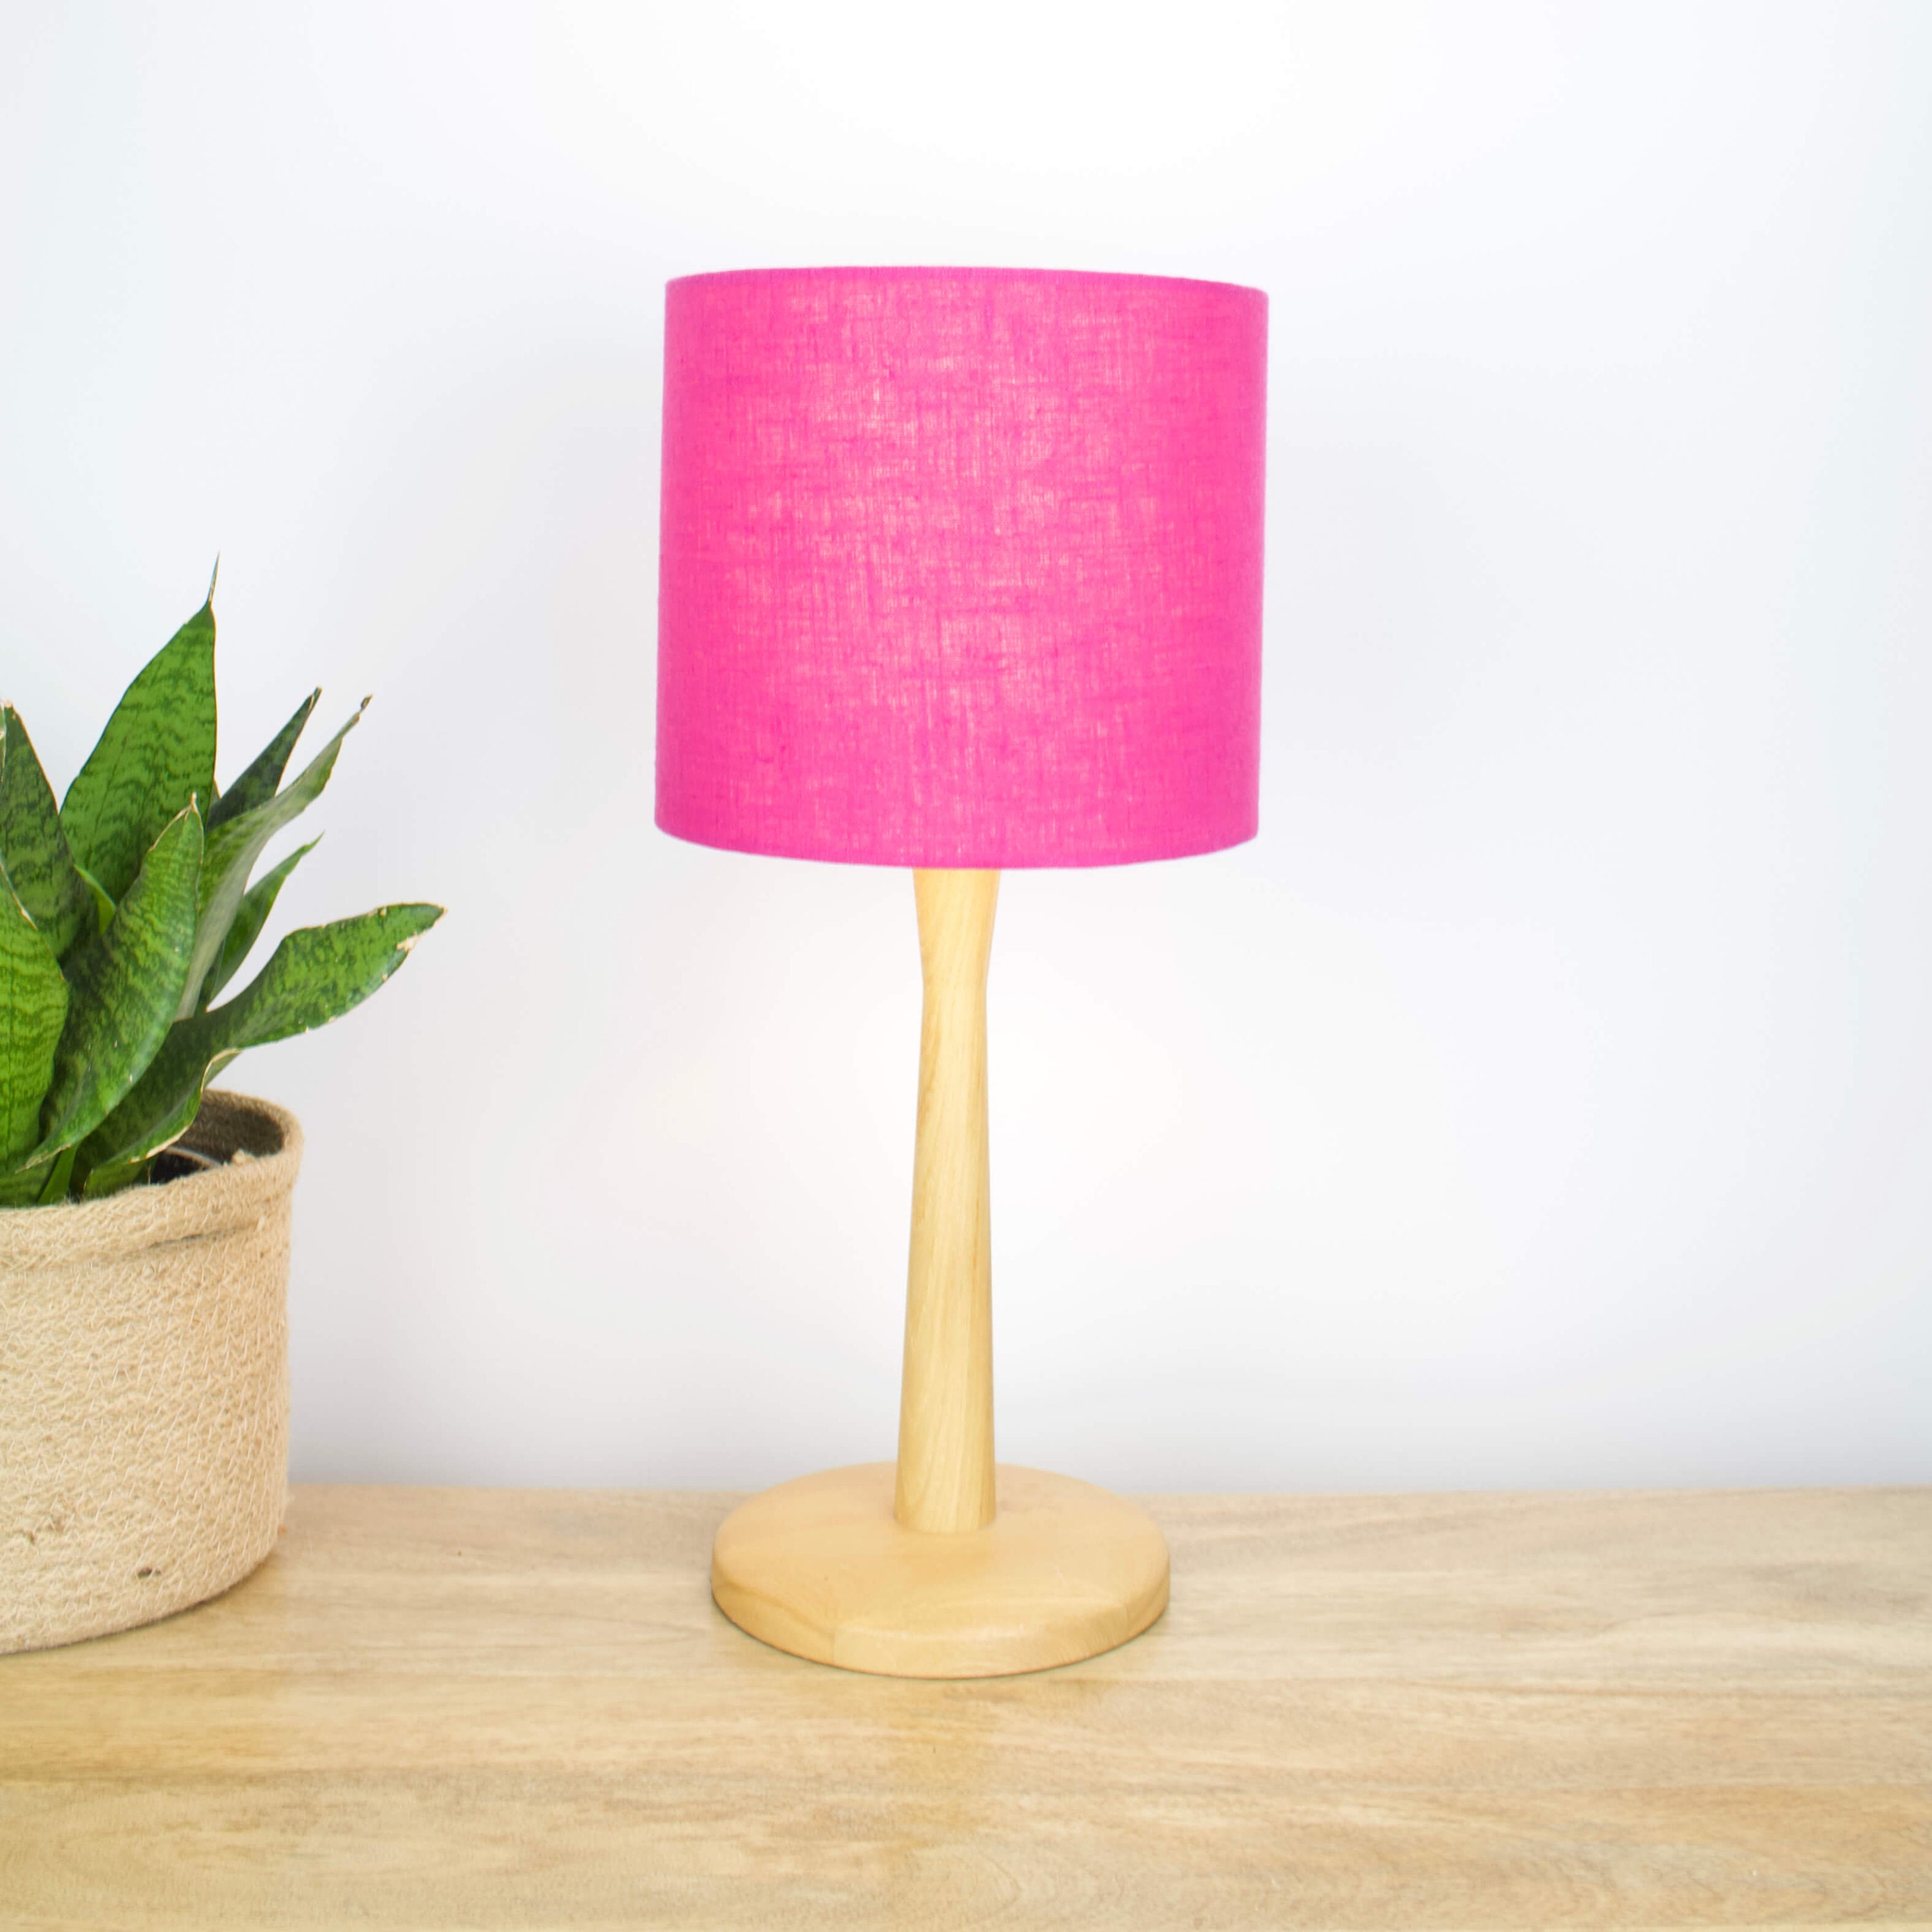 Linen Hot Pink Lamp Shade, UNO Drum Bright Fuchsia Pink Lampshade for Table  Lamp, Floor Lamp or Ceiling Light Shade 